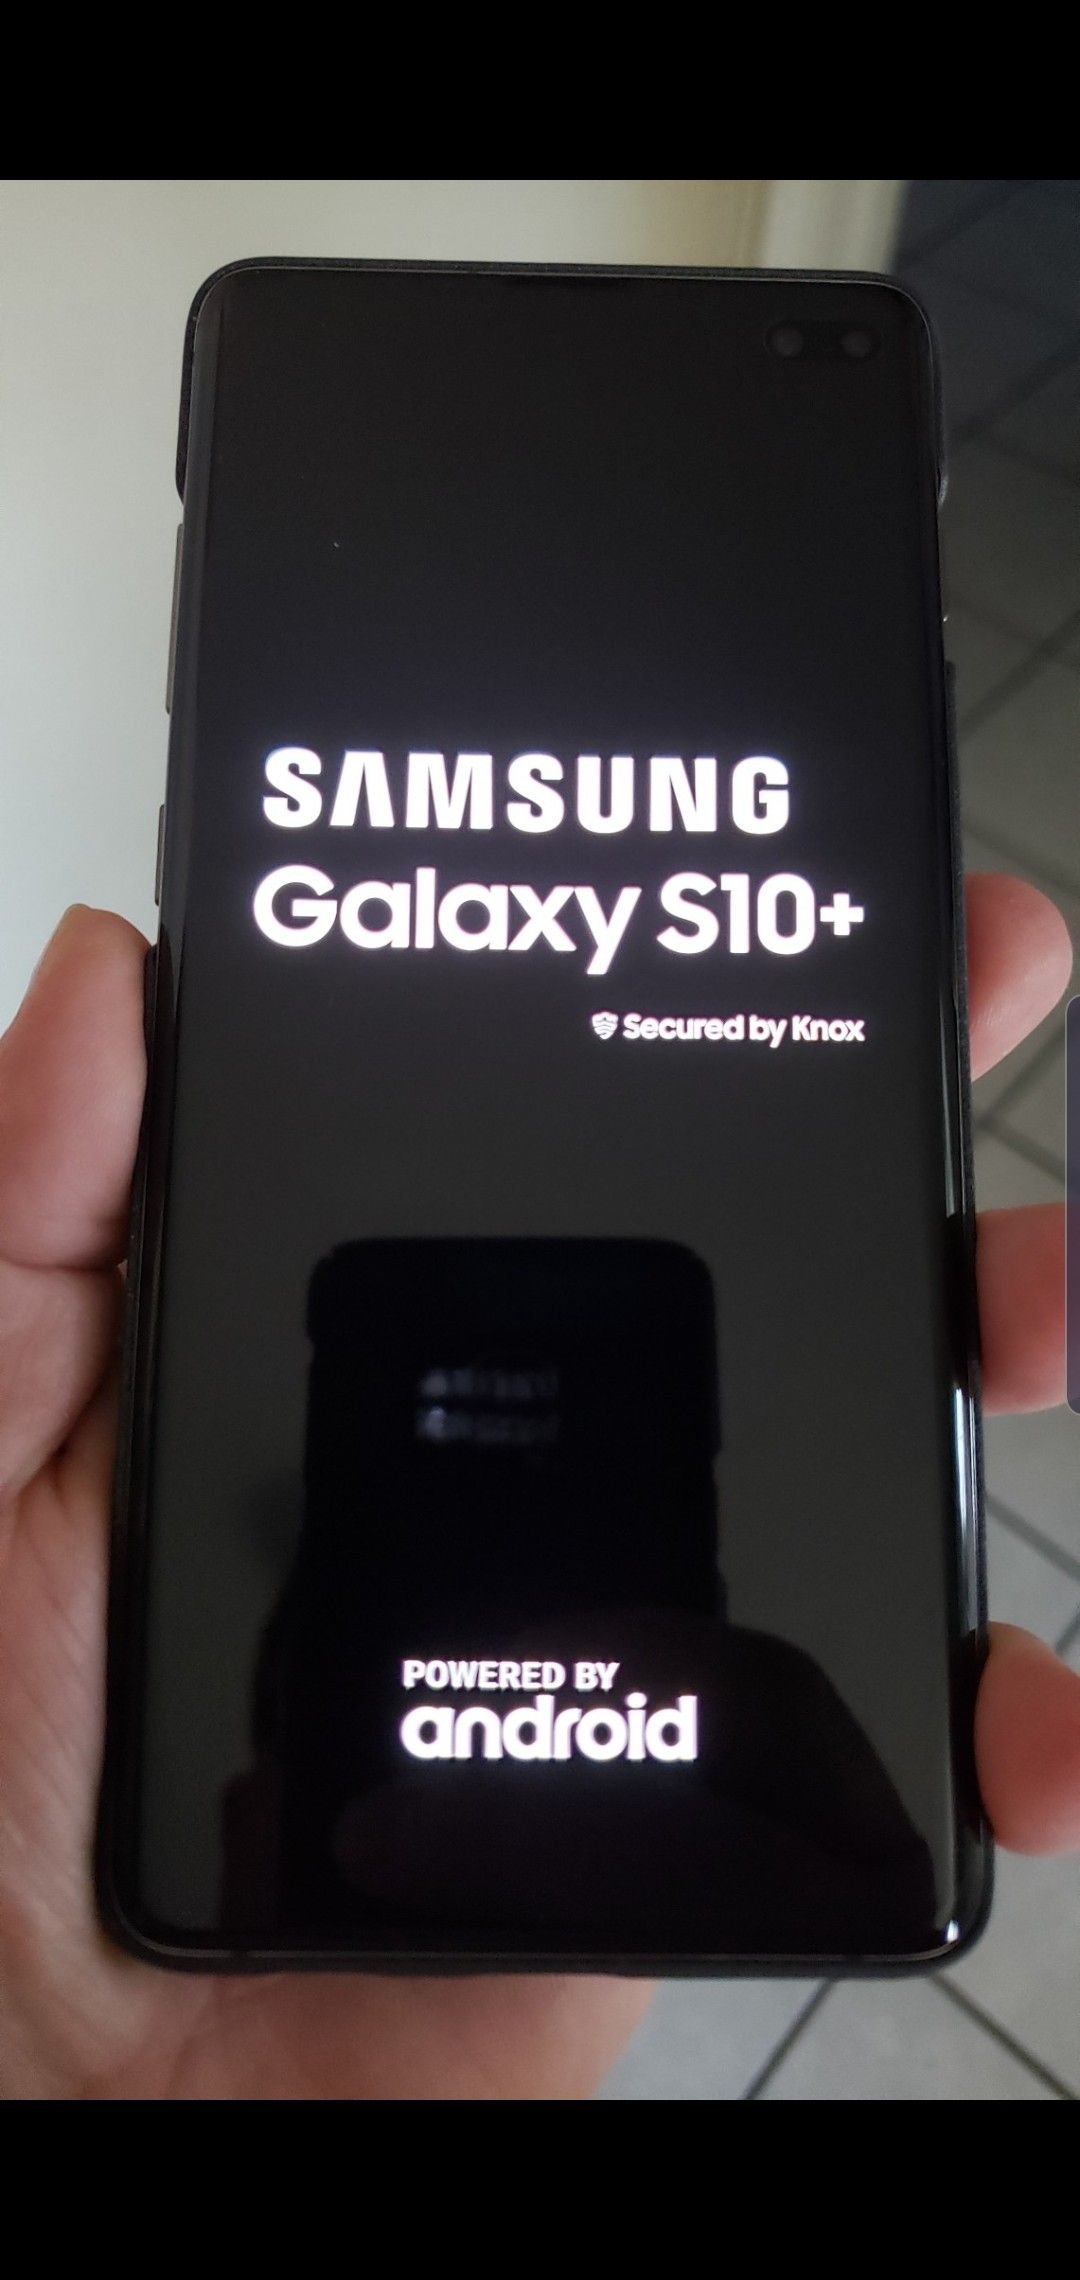 Samsung Galaxy S10 plus brand new 128 GB 8 ram unlocked for any Carrier no charger just the cellphone habló español